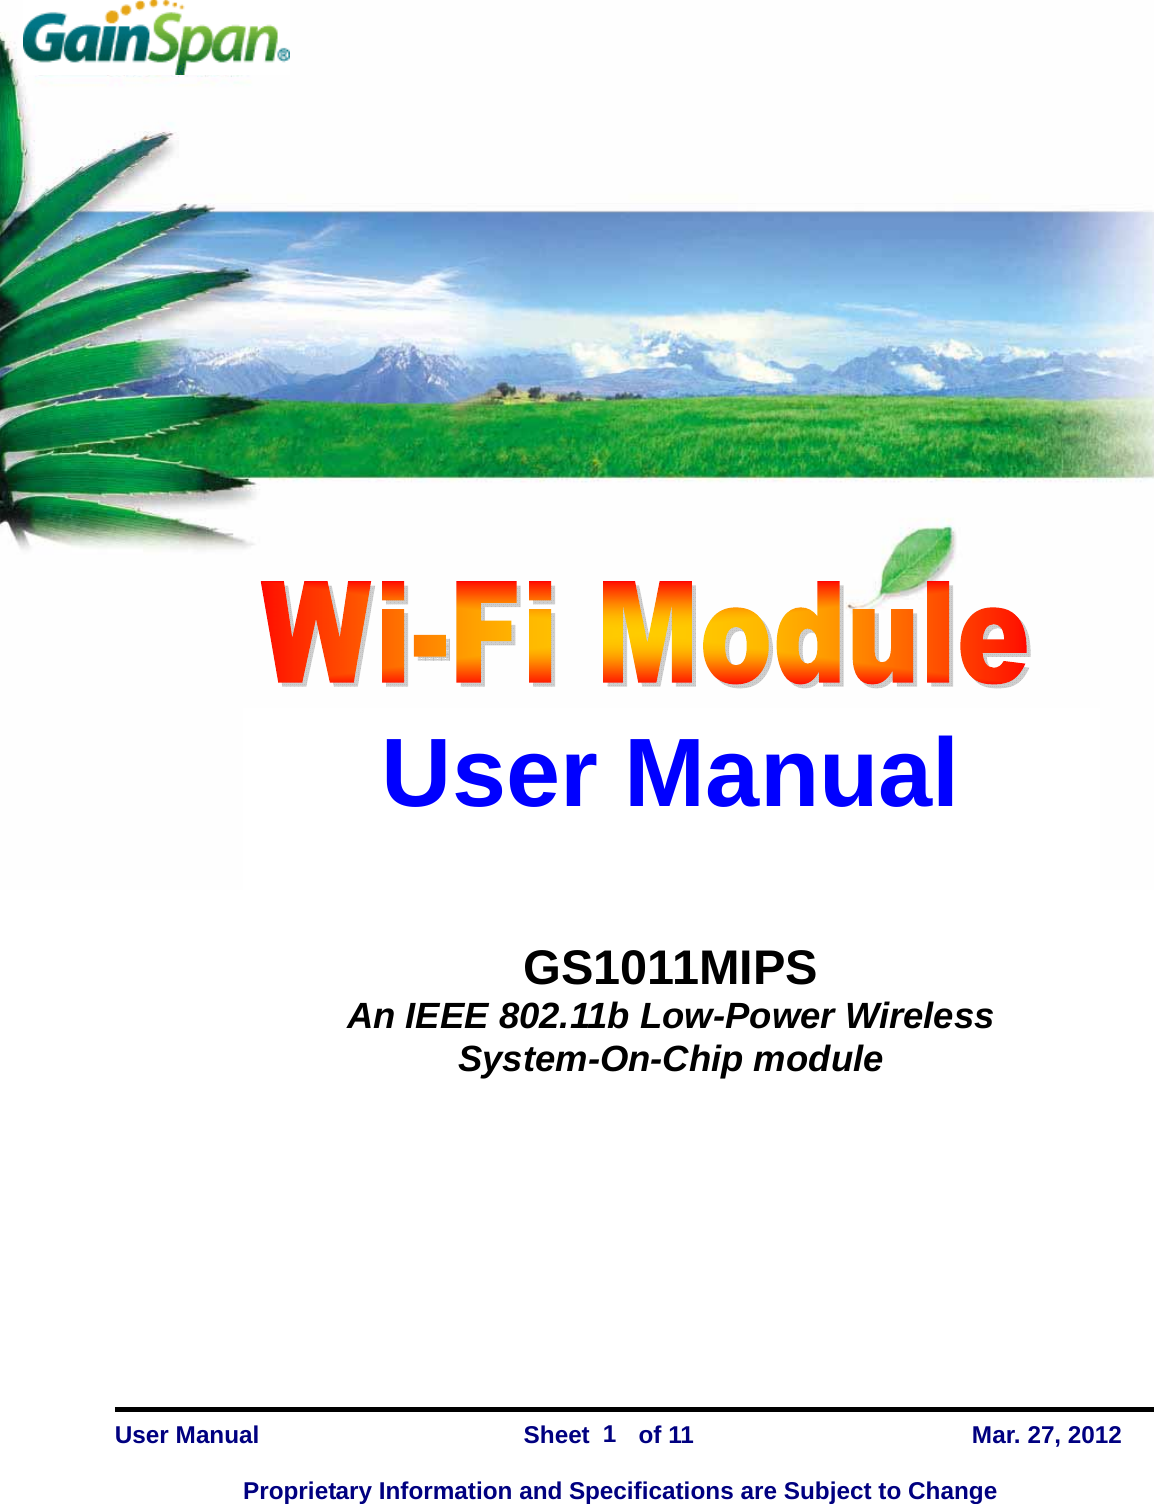      GS1011MIPS    User Manual                Sheet    of 11      Mar. 27, 2012  Proprietary Information and Specifications are Subject to Change 1  User Manual   GS1011MIPS  An IEEE 802.11b Low-Power Wireless System-On-Chip module 